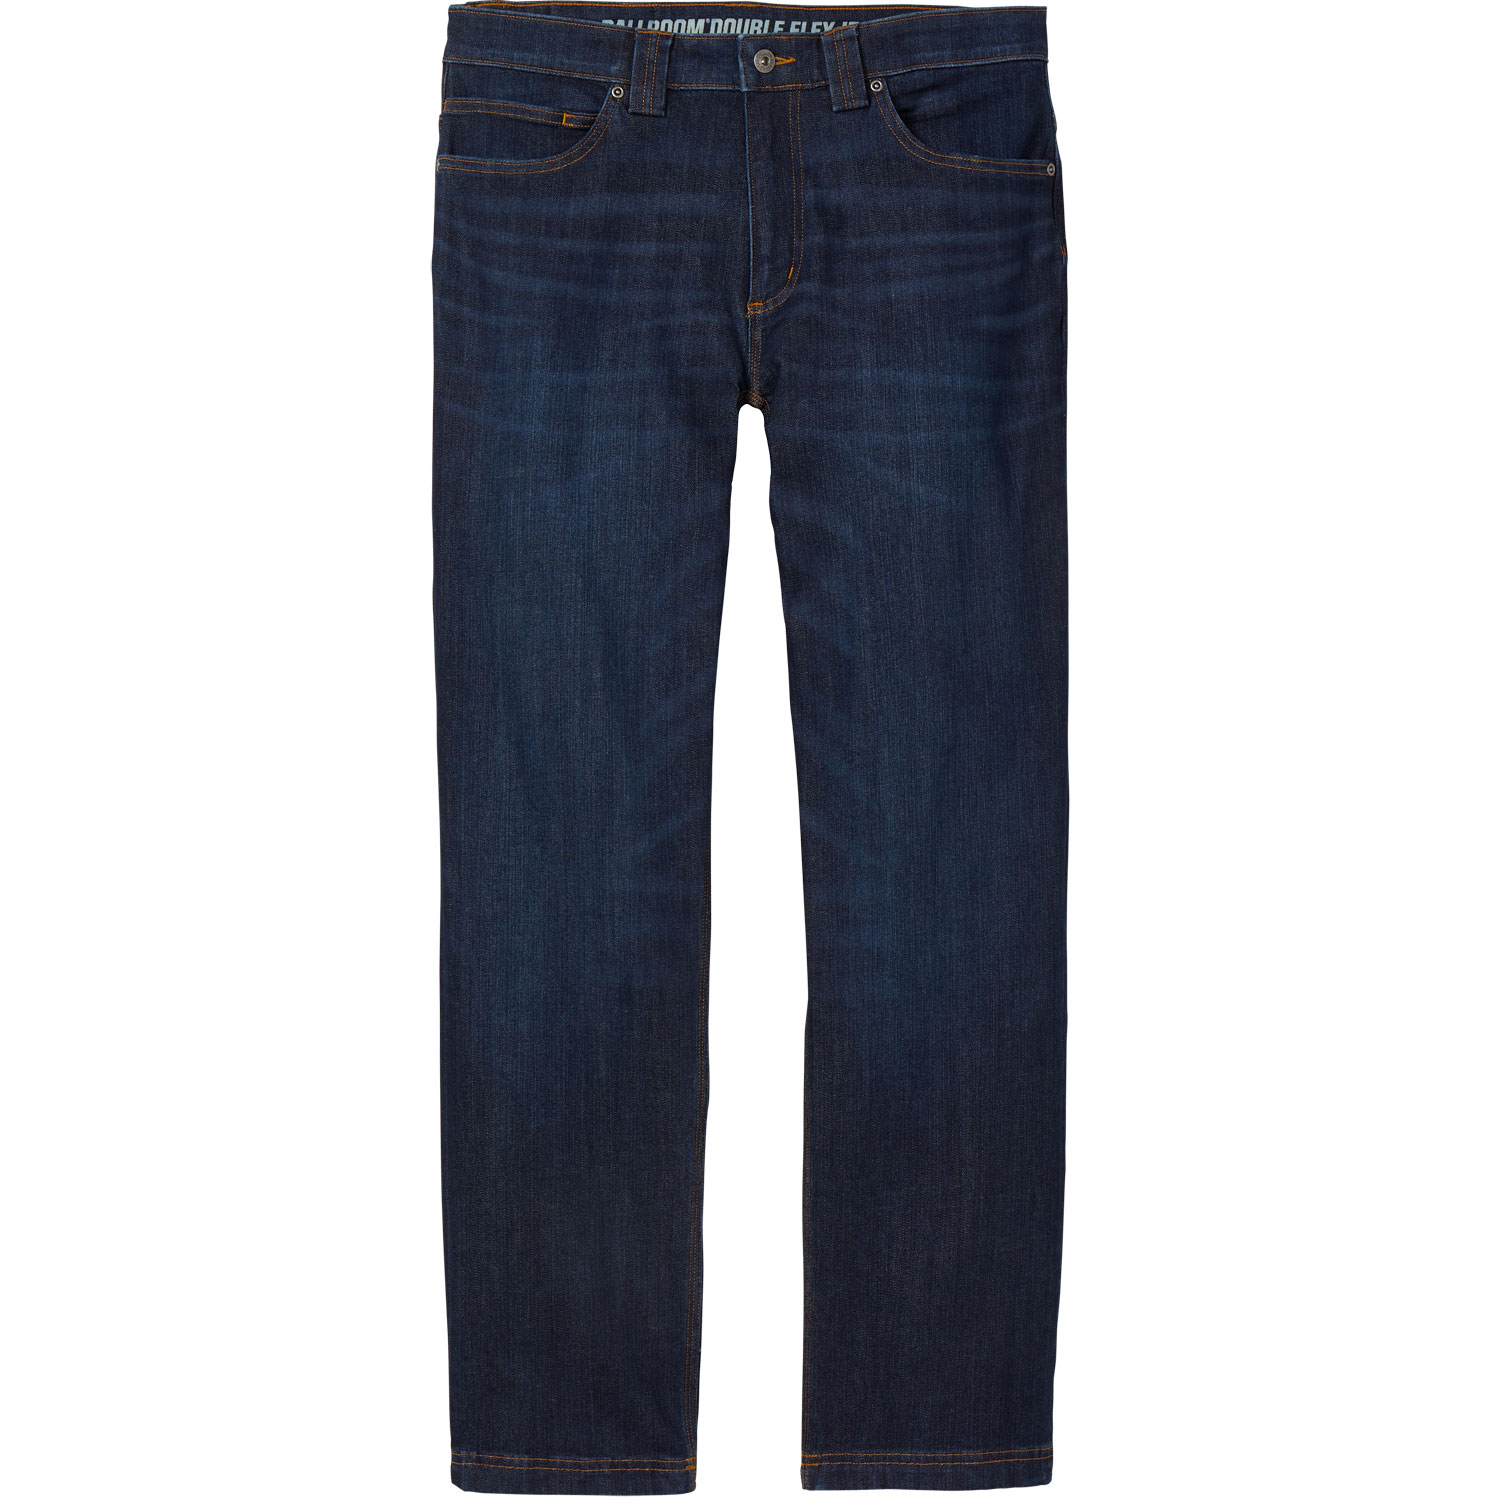 Men's Ballroom Double Flex Relaxed Fit Jeans | Duluth Trading Company